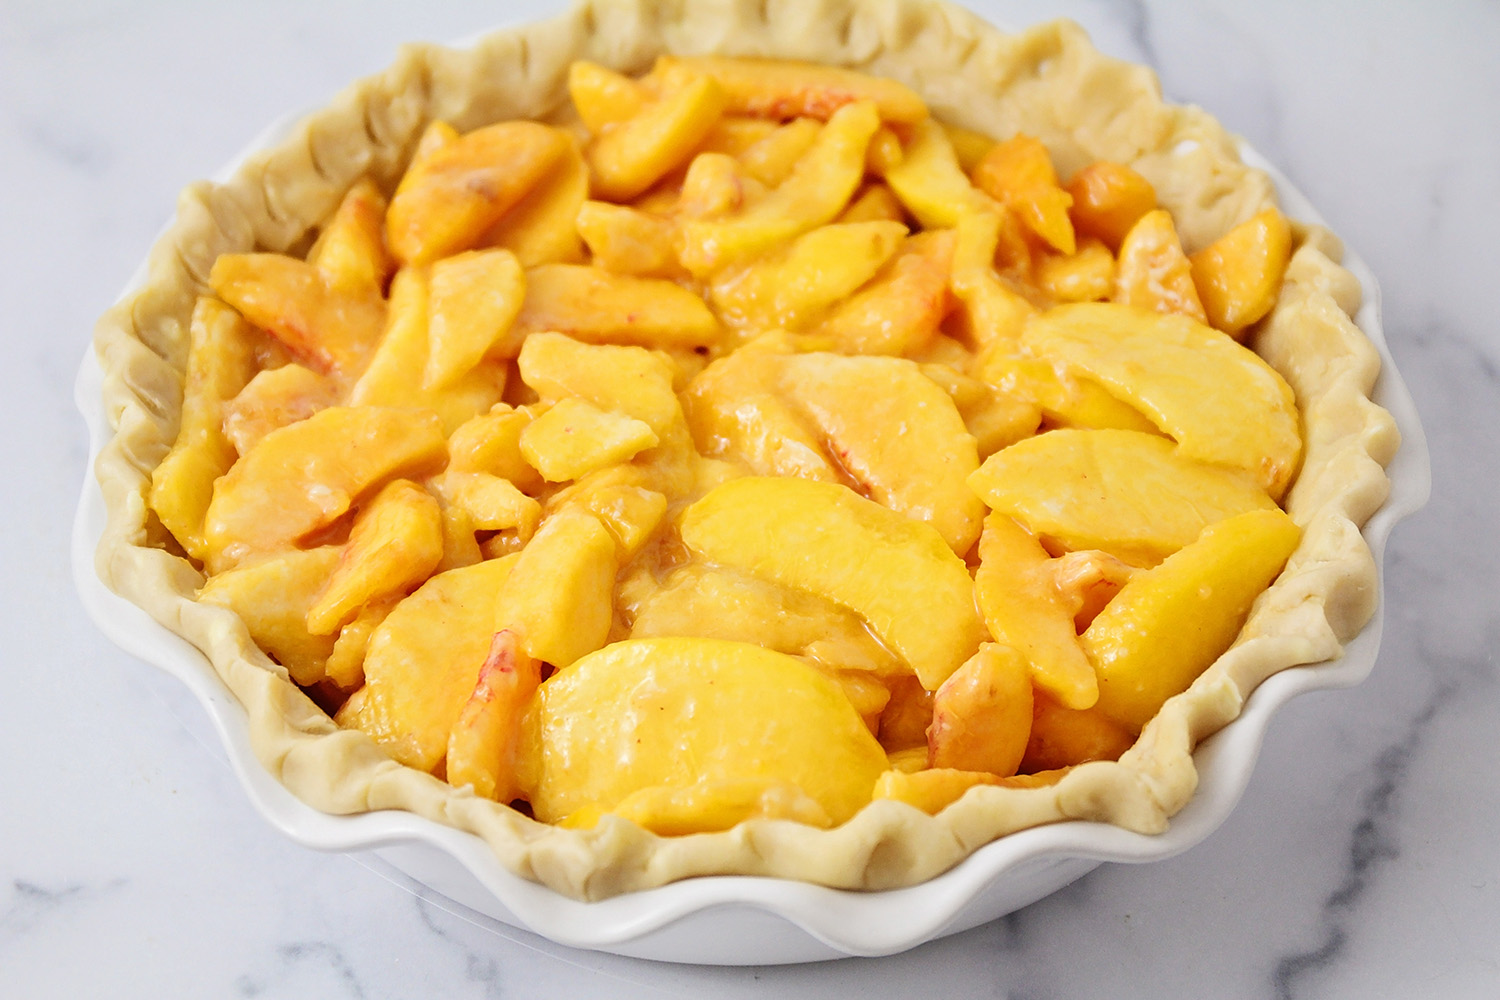 This peach crisp pie is loaded with juicy fresh peaches, all covered with buttery cinnamon crisp topping!